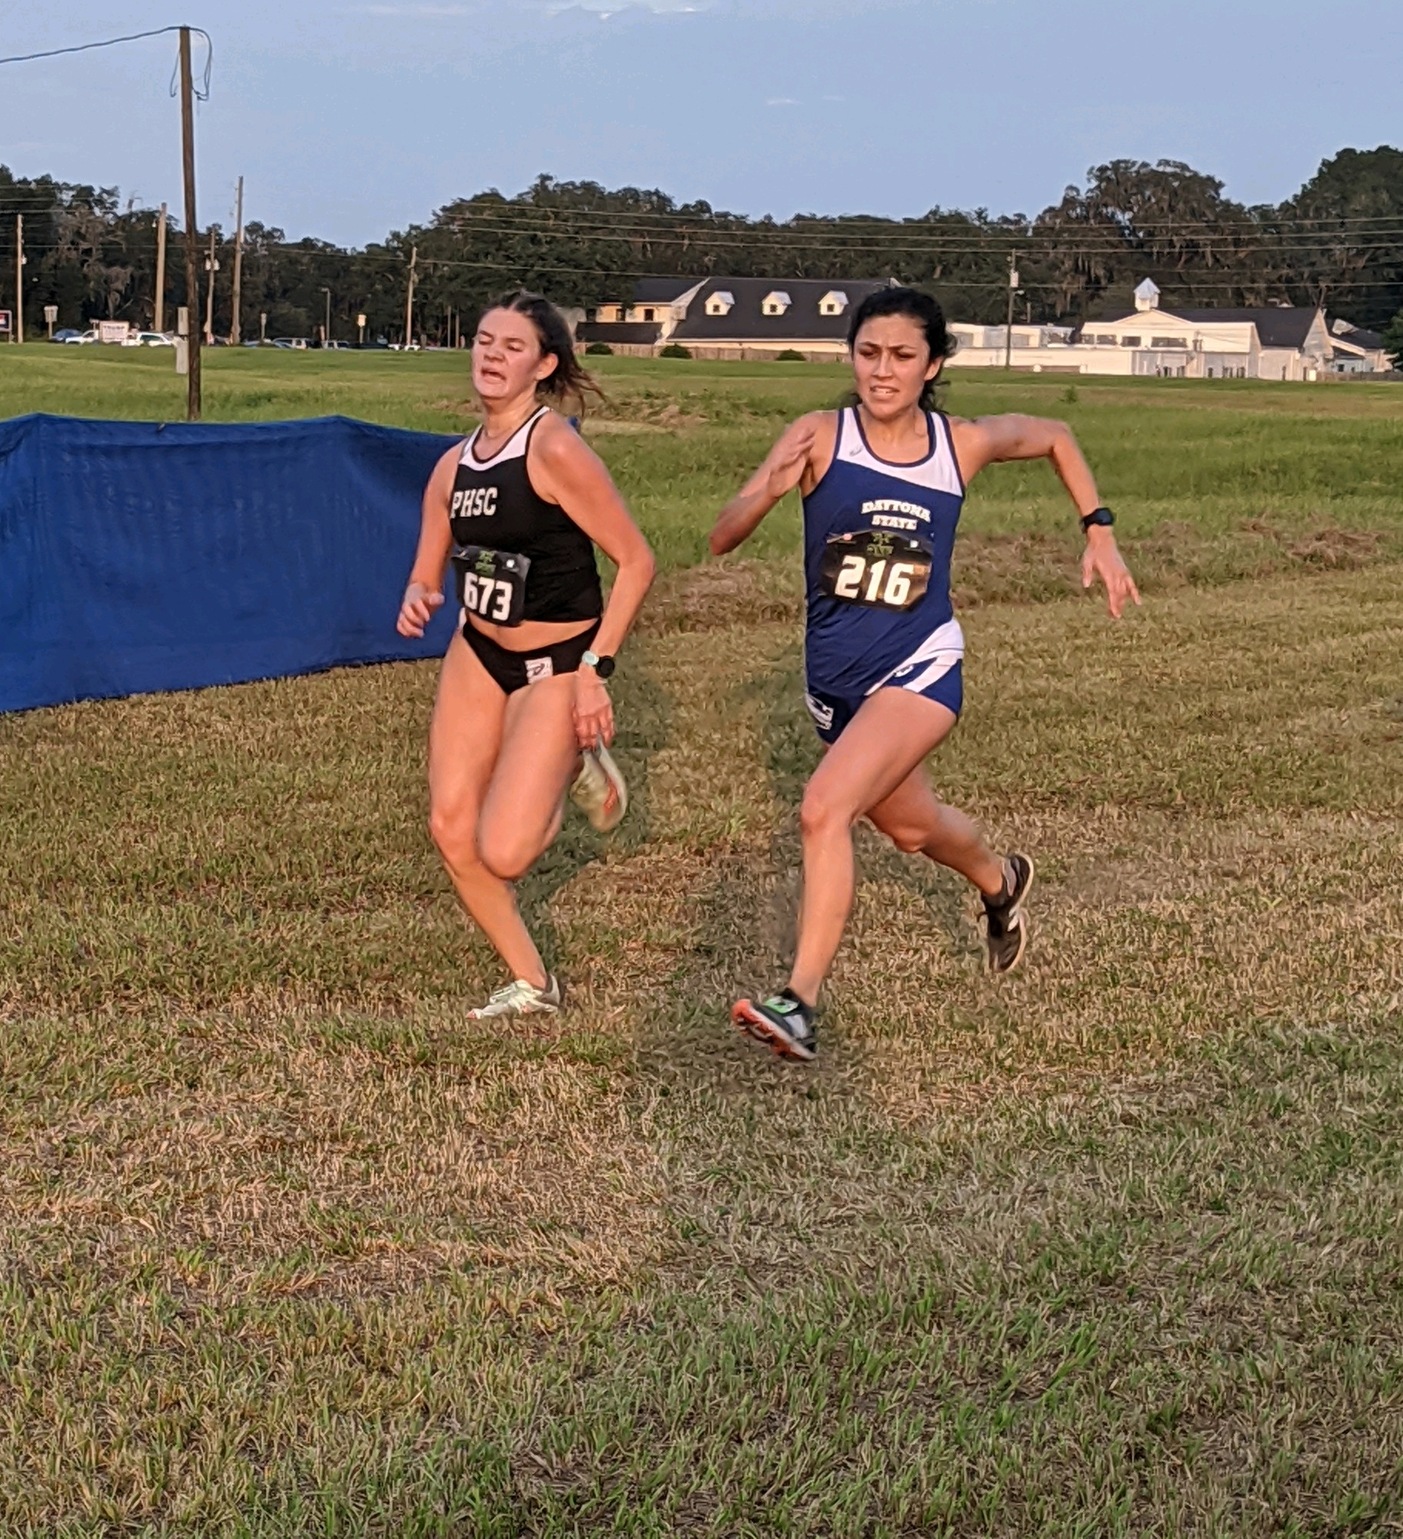 Julia Uvalle fighting to the finish